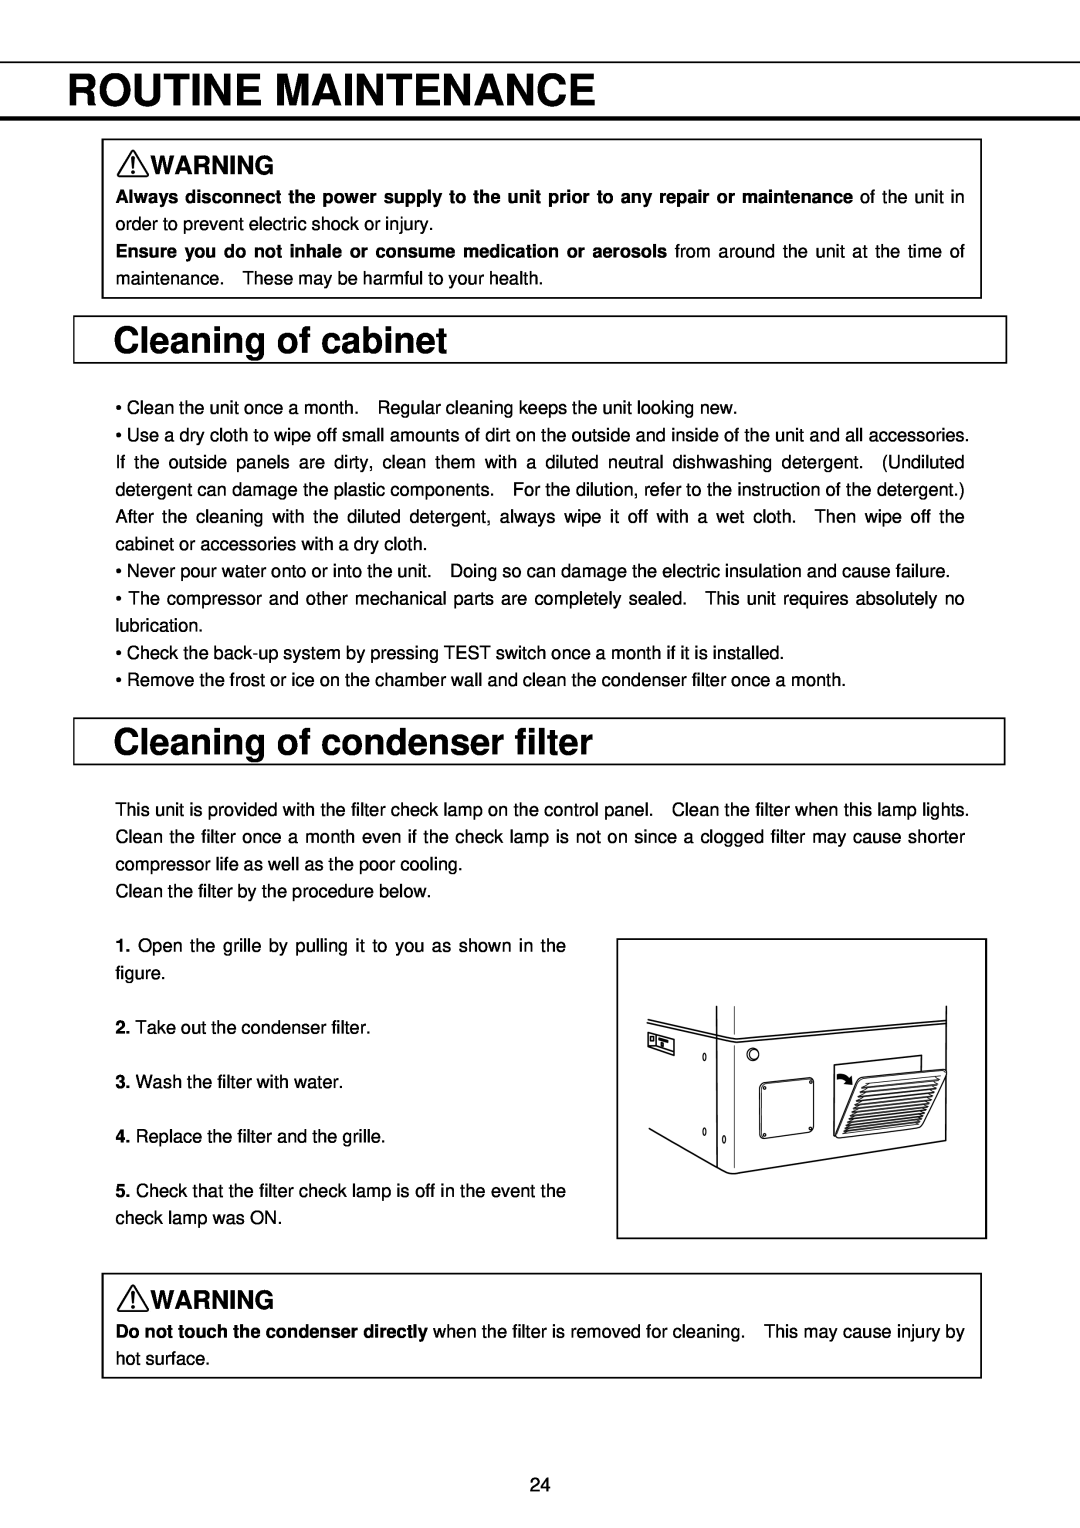 Sanyo MDF-U32V instruction manual Routine Maintenance, Cleaning of cabinet, Cleaning of condenser filter 